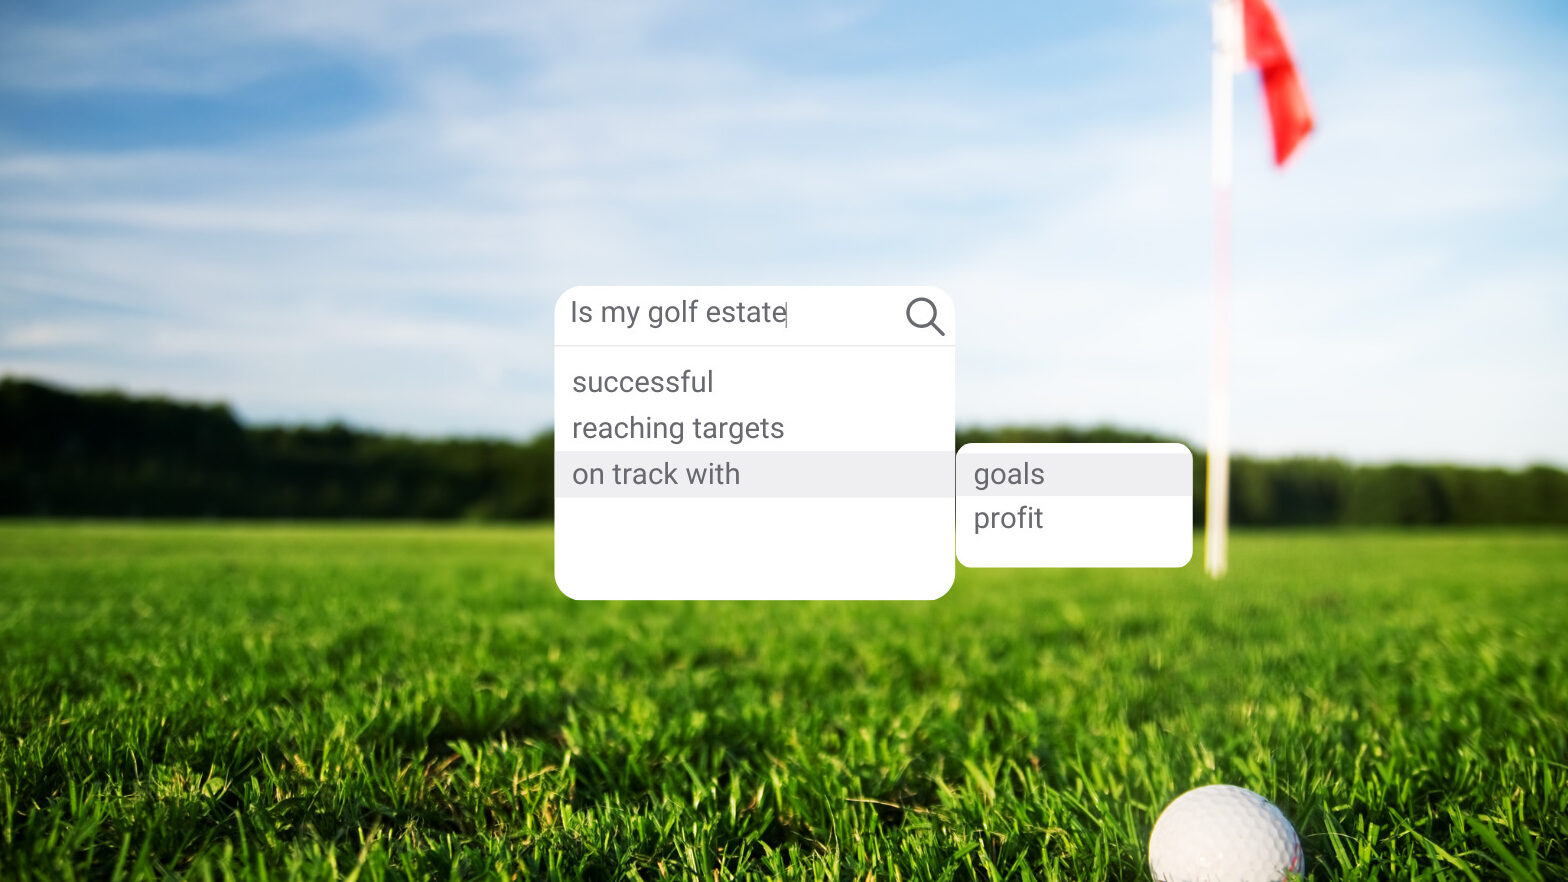 Featured image for “From Birdies to Bottom Line: Decoding the Metrics of Golf Estate Success”